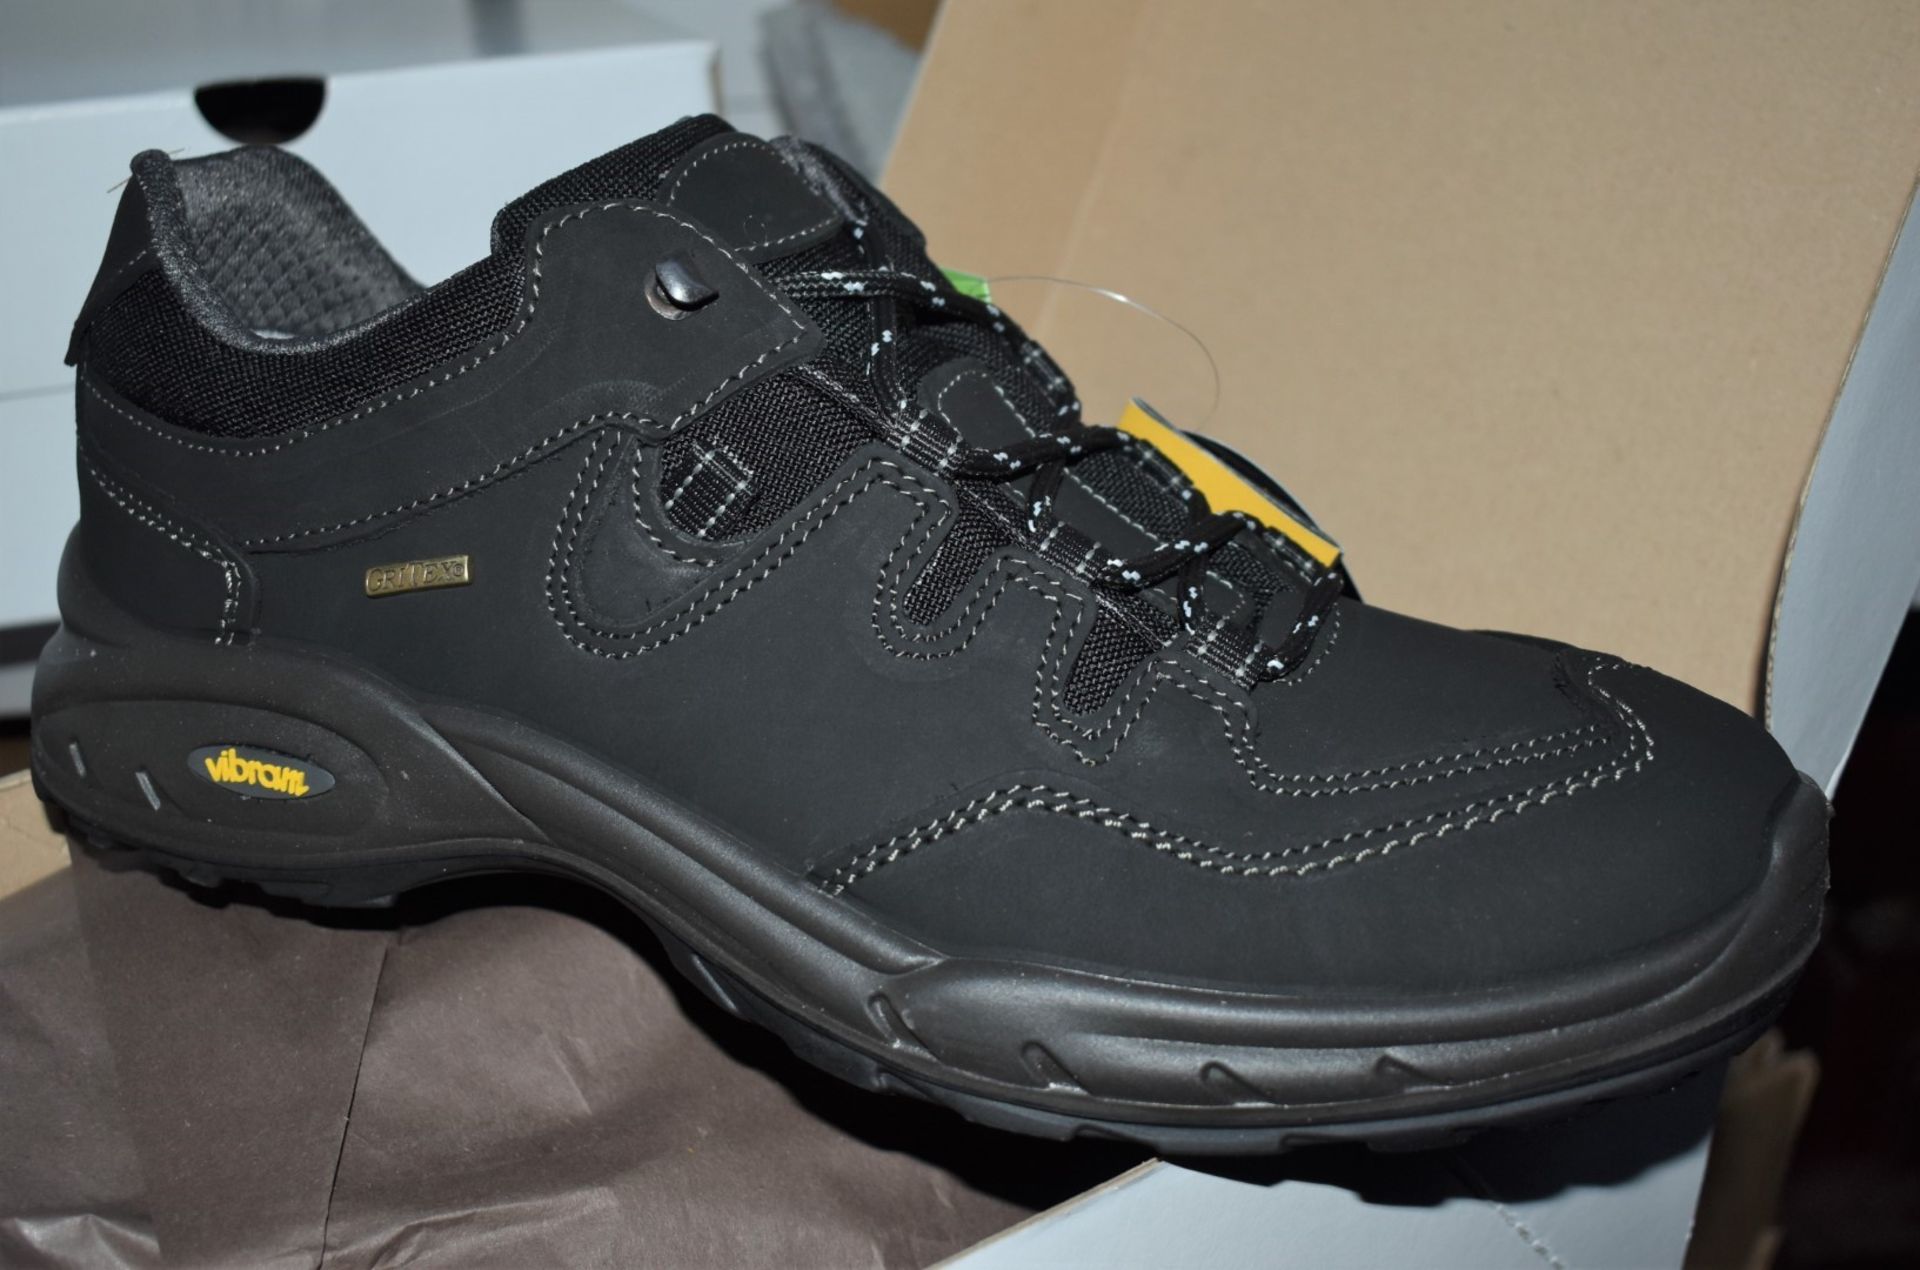 1 x Pair of Mens VIBRAM Walking Shoes - Outdoor GriTex Trekking Shoes With Cordura Fabric - Made - Image 2 of 2